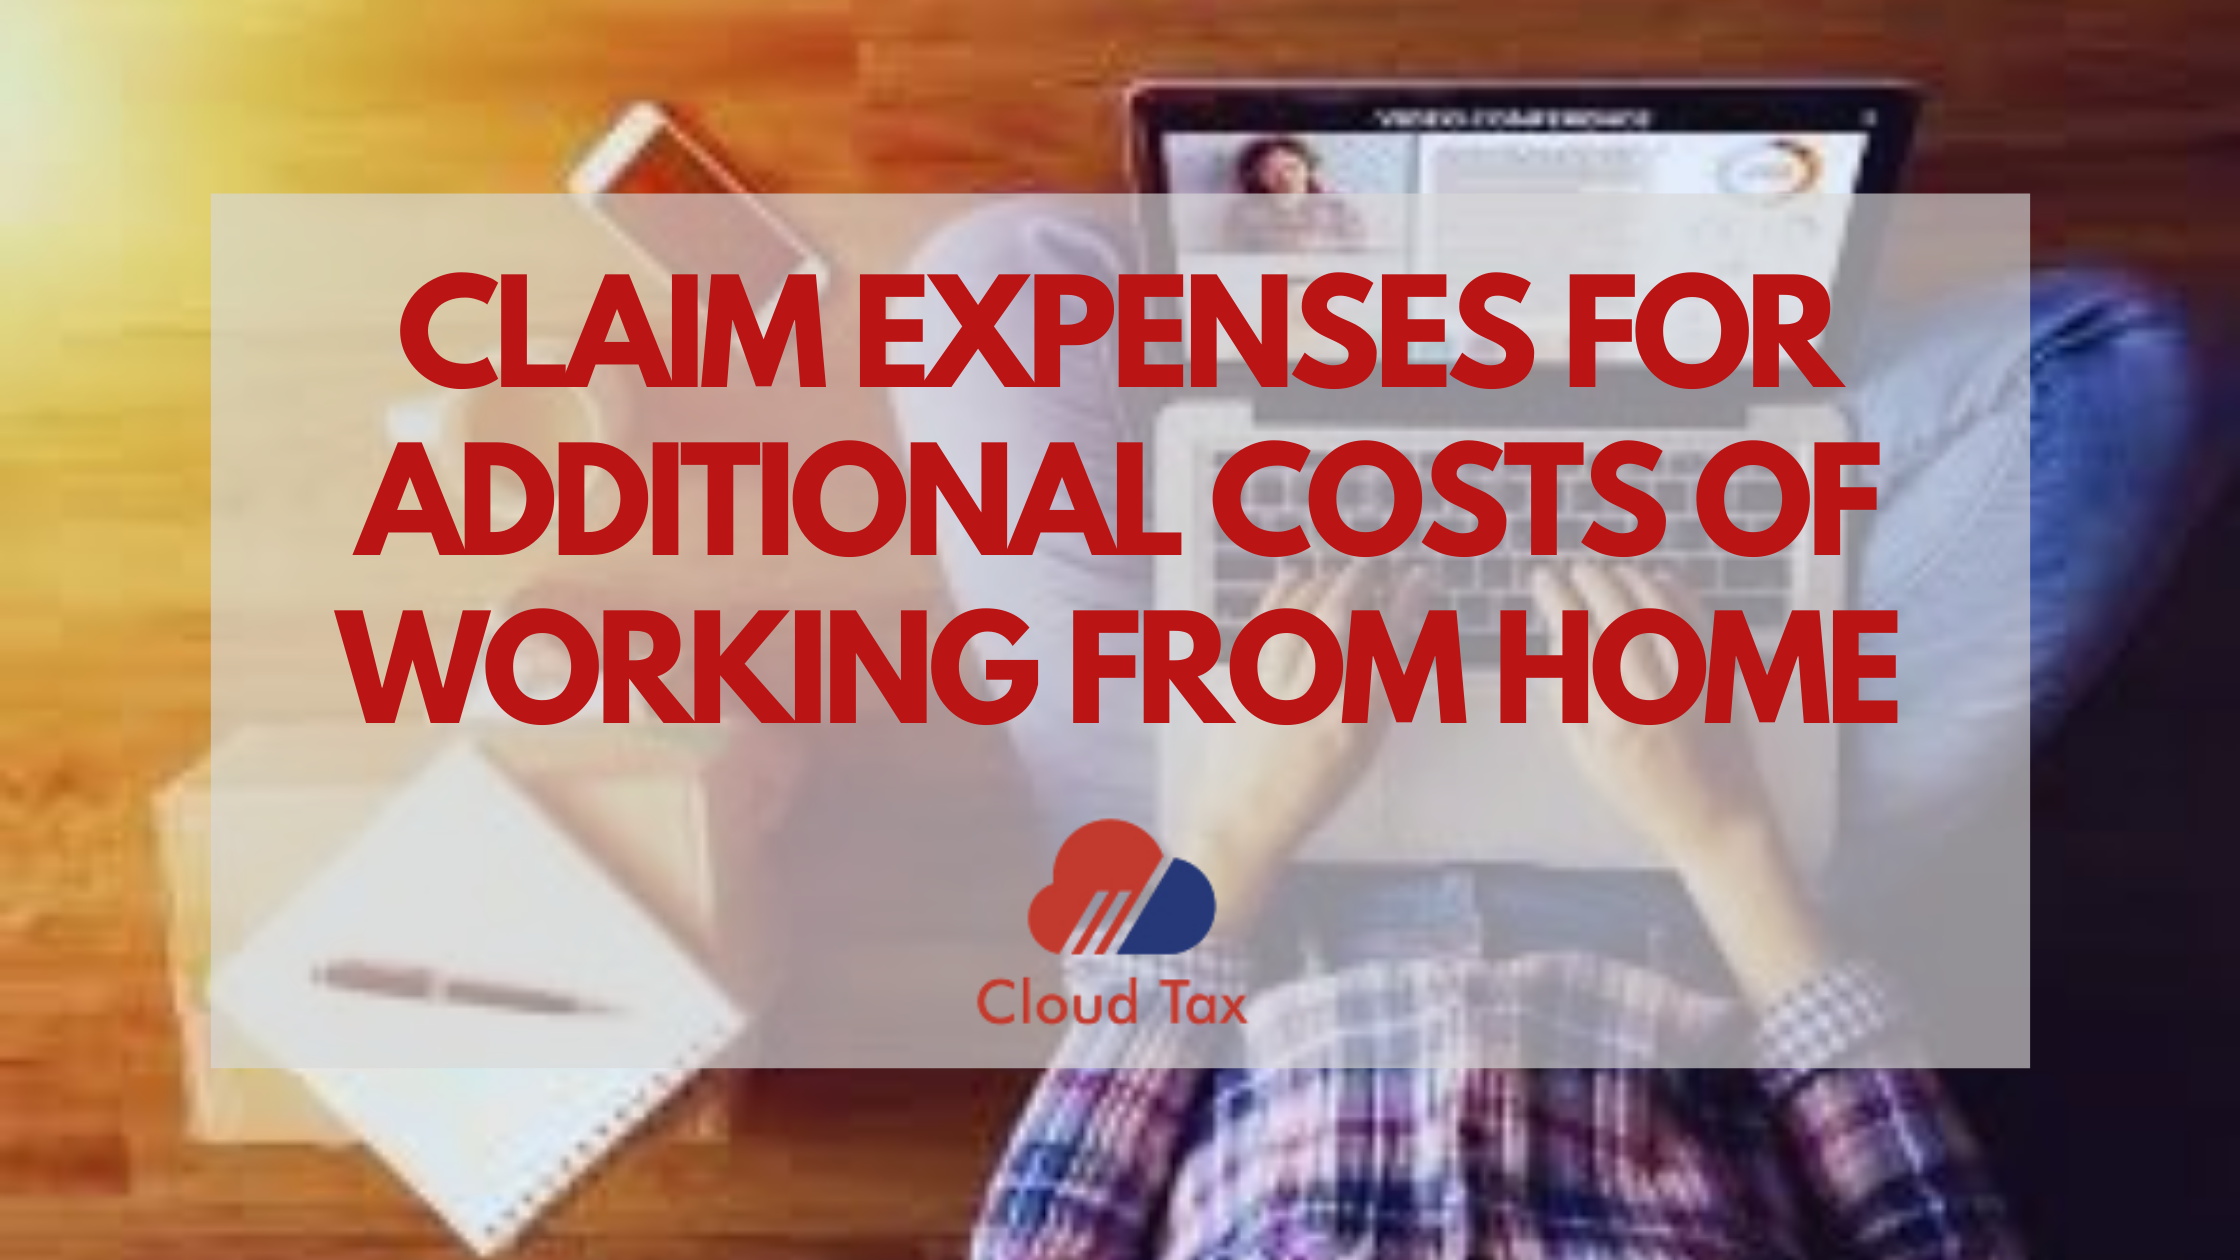 Claim expenses for additional costs of working from home Cloud Tax